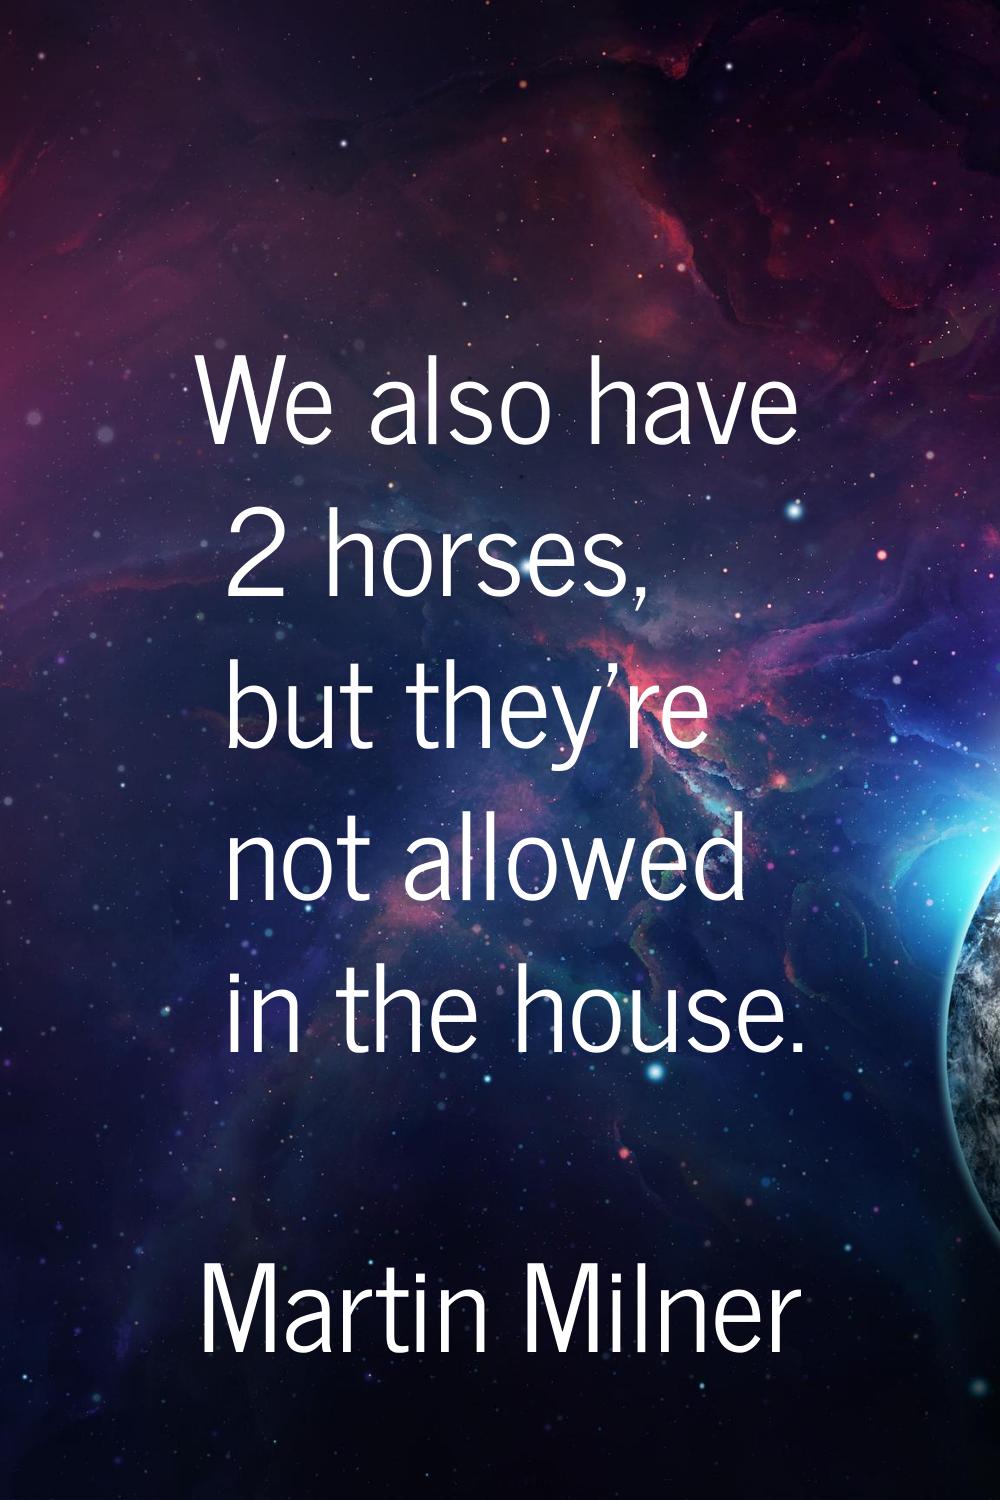 We also have 2 horses, but they're not allowed in the house.